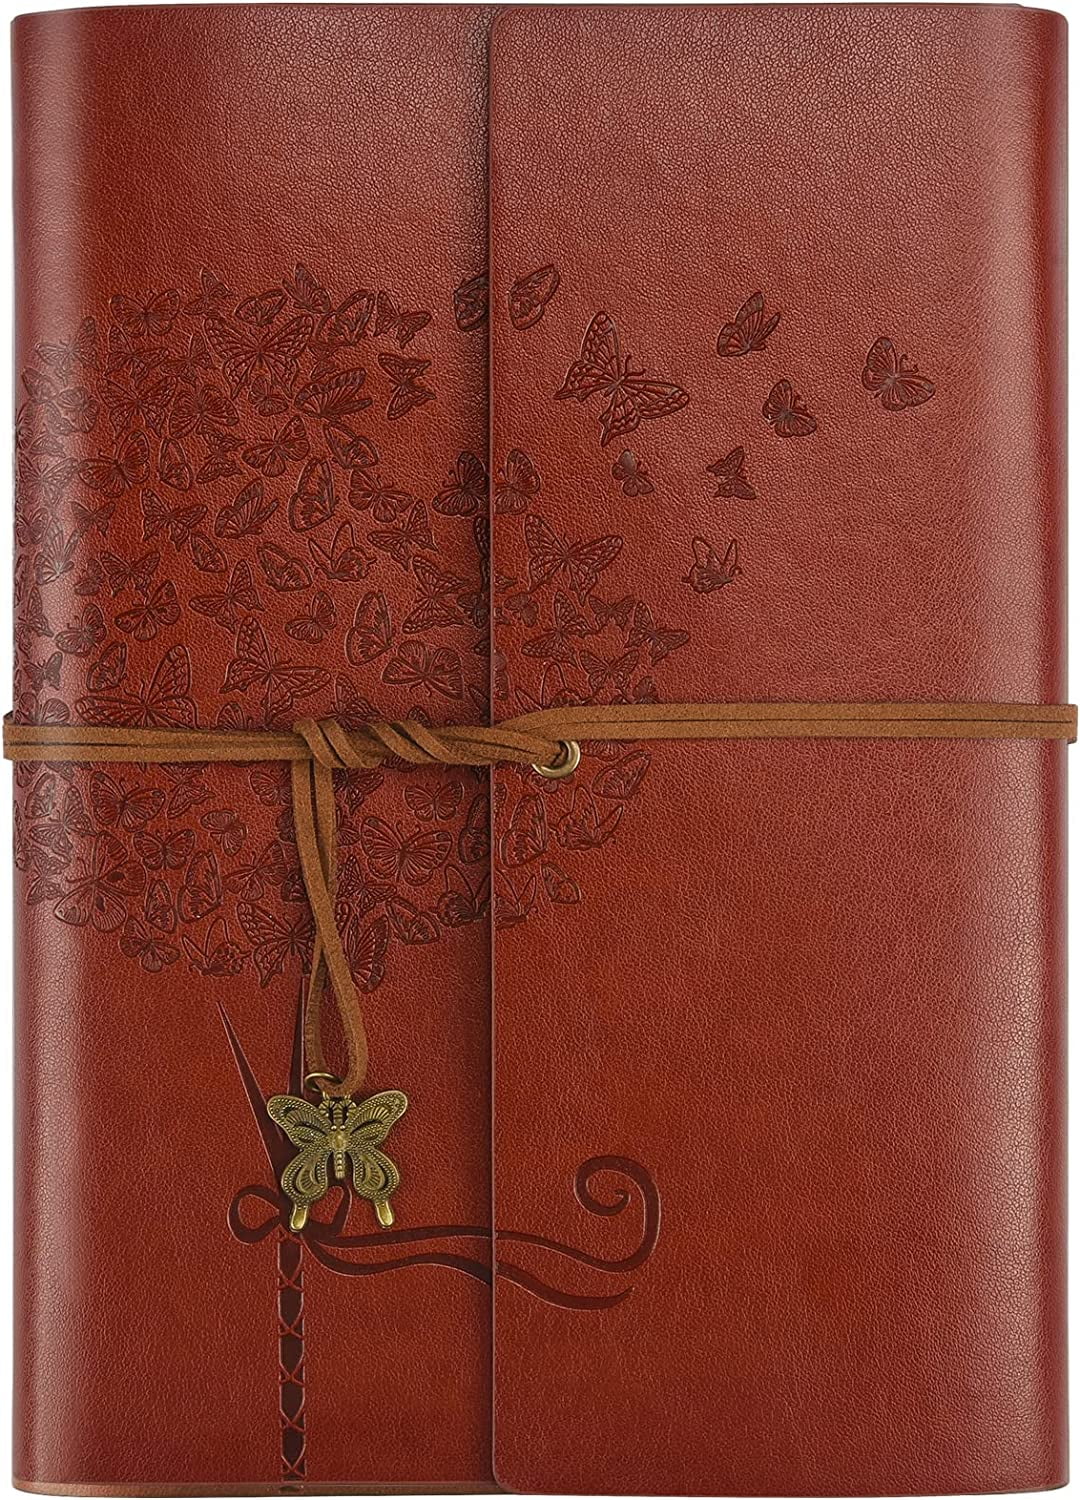 Vintage PU Leather Journals Notebook Lined Paper Diary Planner Pen